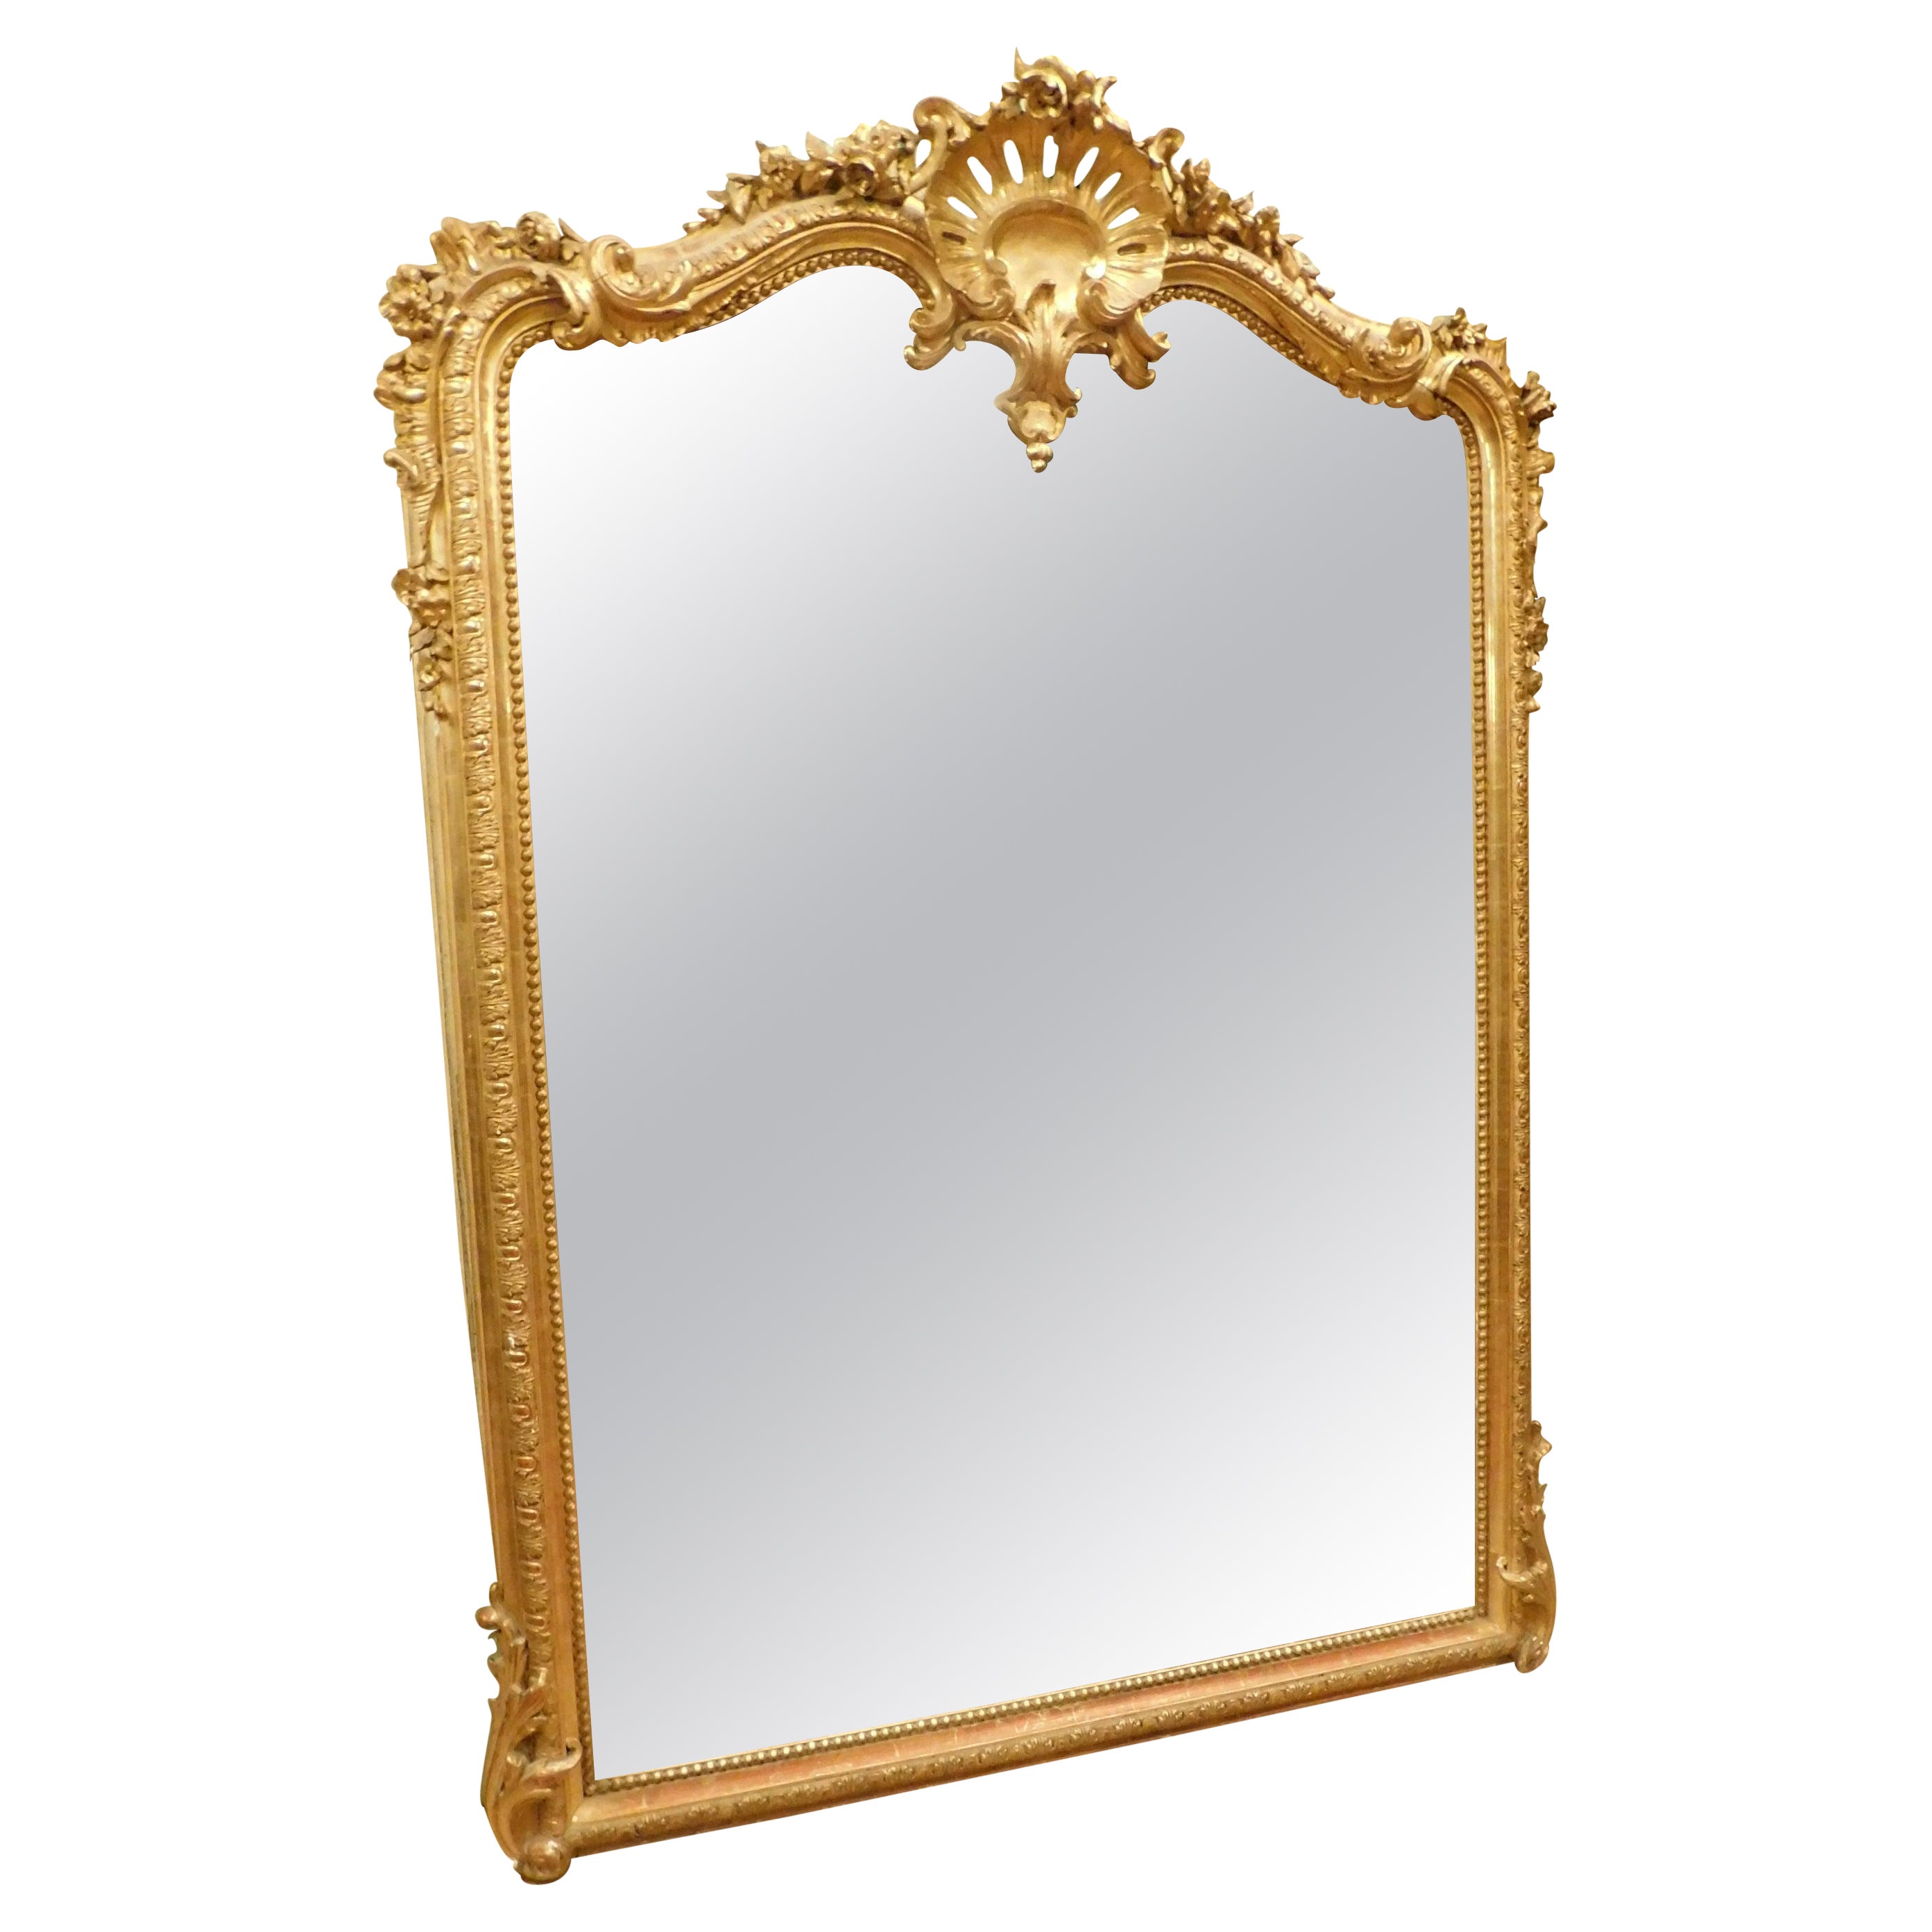 Antique Gilded Mirror Carved with Shell and Frills, Late 19th Century Italy